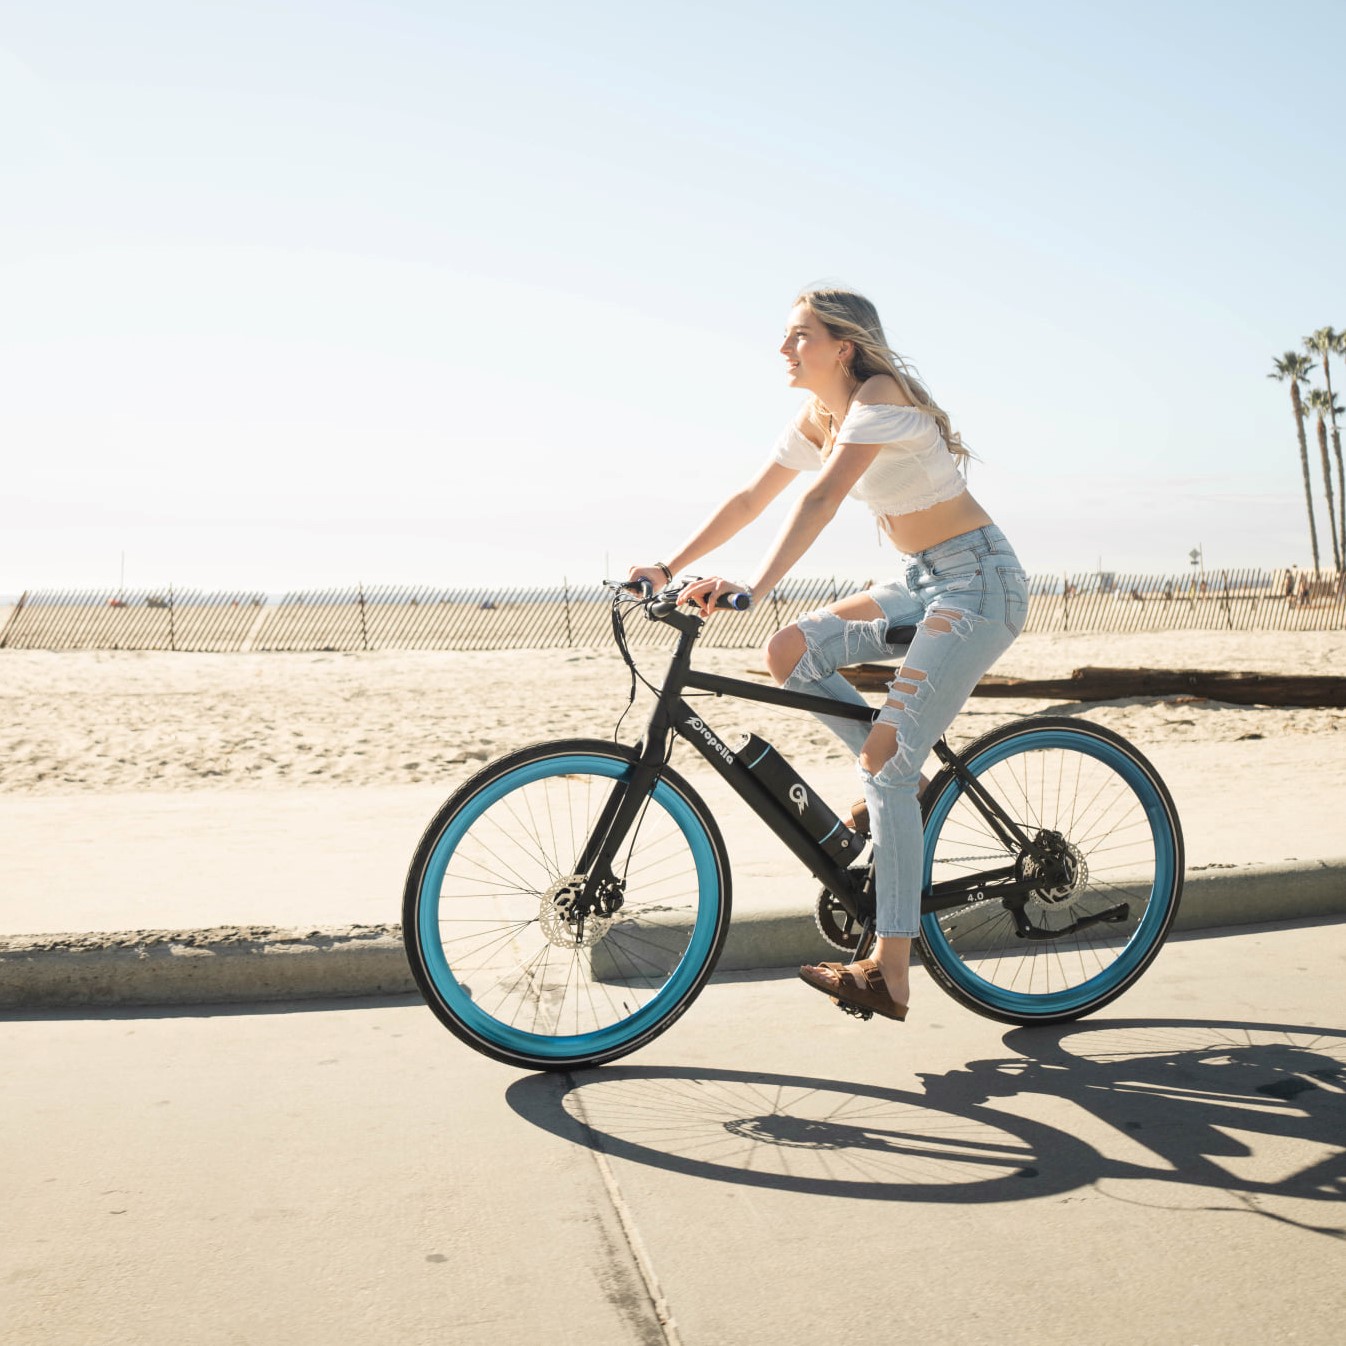 11 Best eBike Brands - Must Read This Before Buying